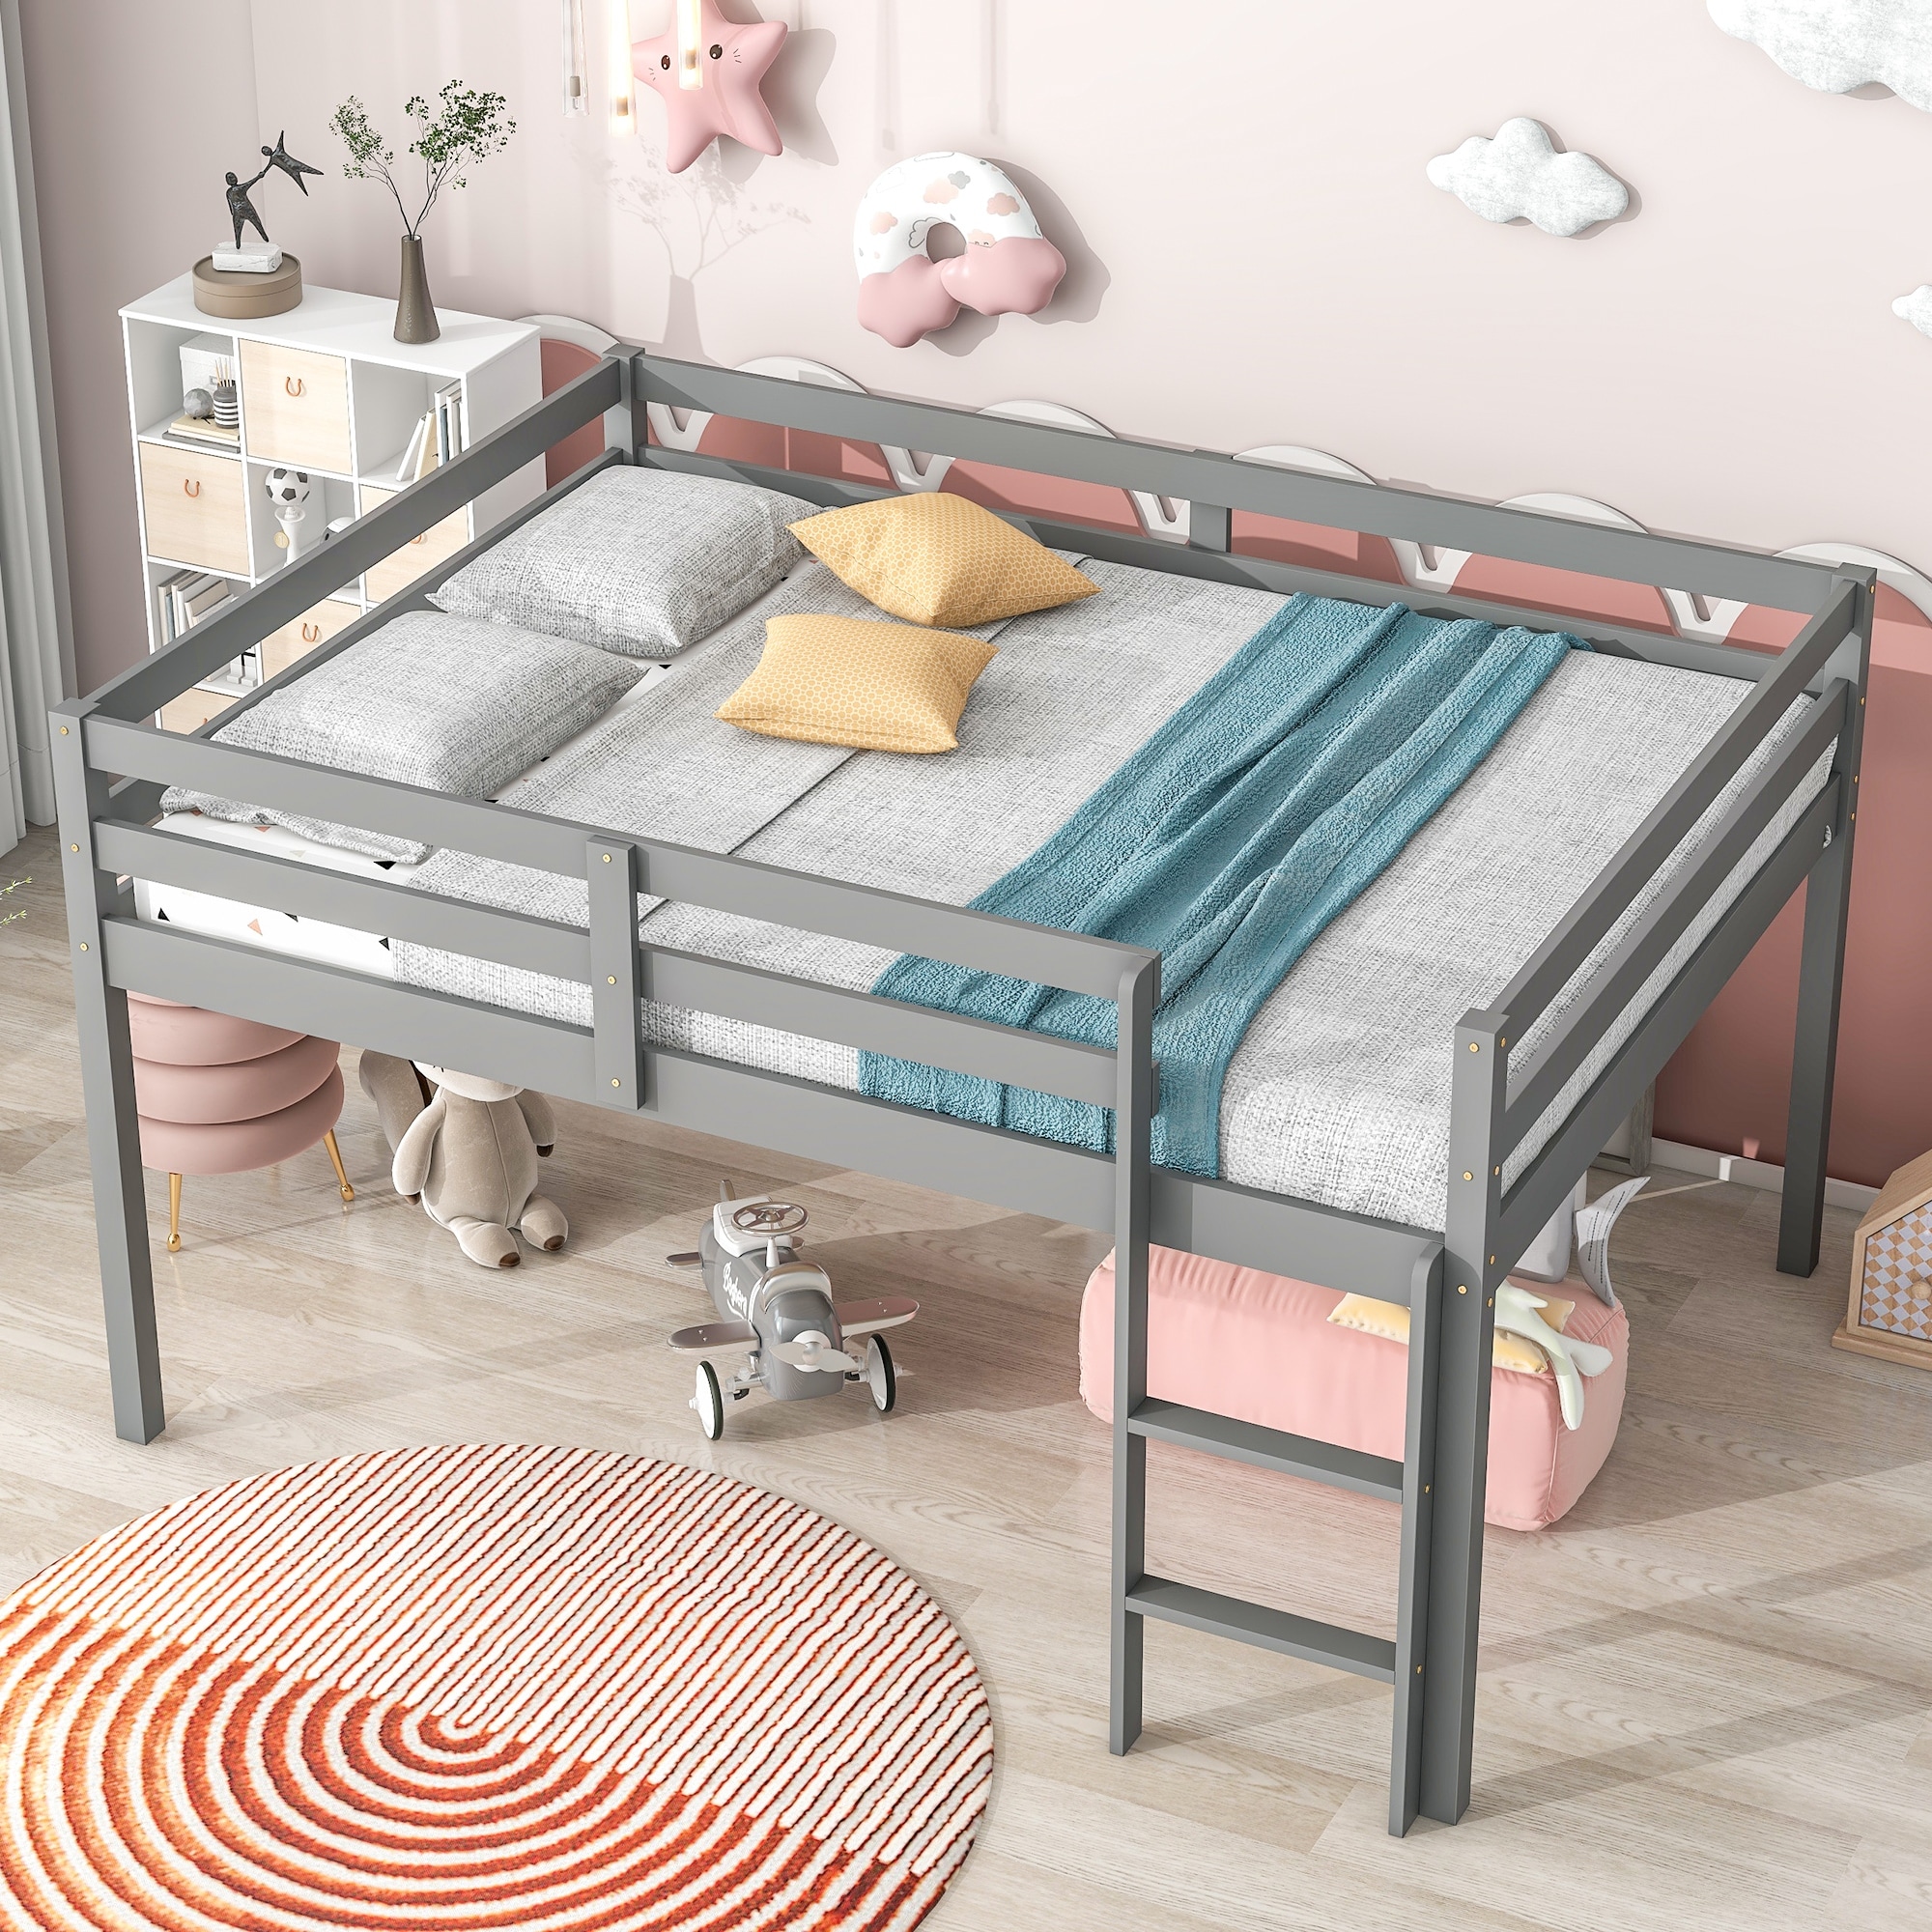 https://ak1.ostkcdn.com/images/products/is/images/direct/05af25c6d4f8d220f16825c9c1bb07cae919b5b8/Full-Loft-Bed-Modern-Pine-Wood-Kids%27-Beds-with-Guardrail-%26-Underbed-Storage-Space.jpg